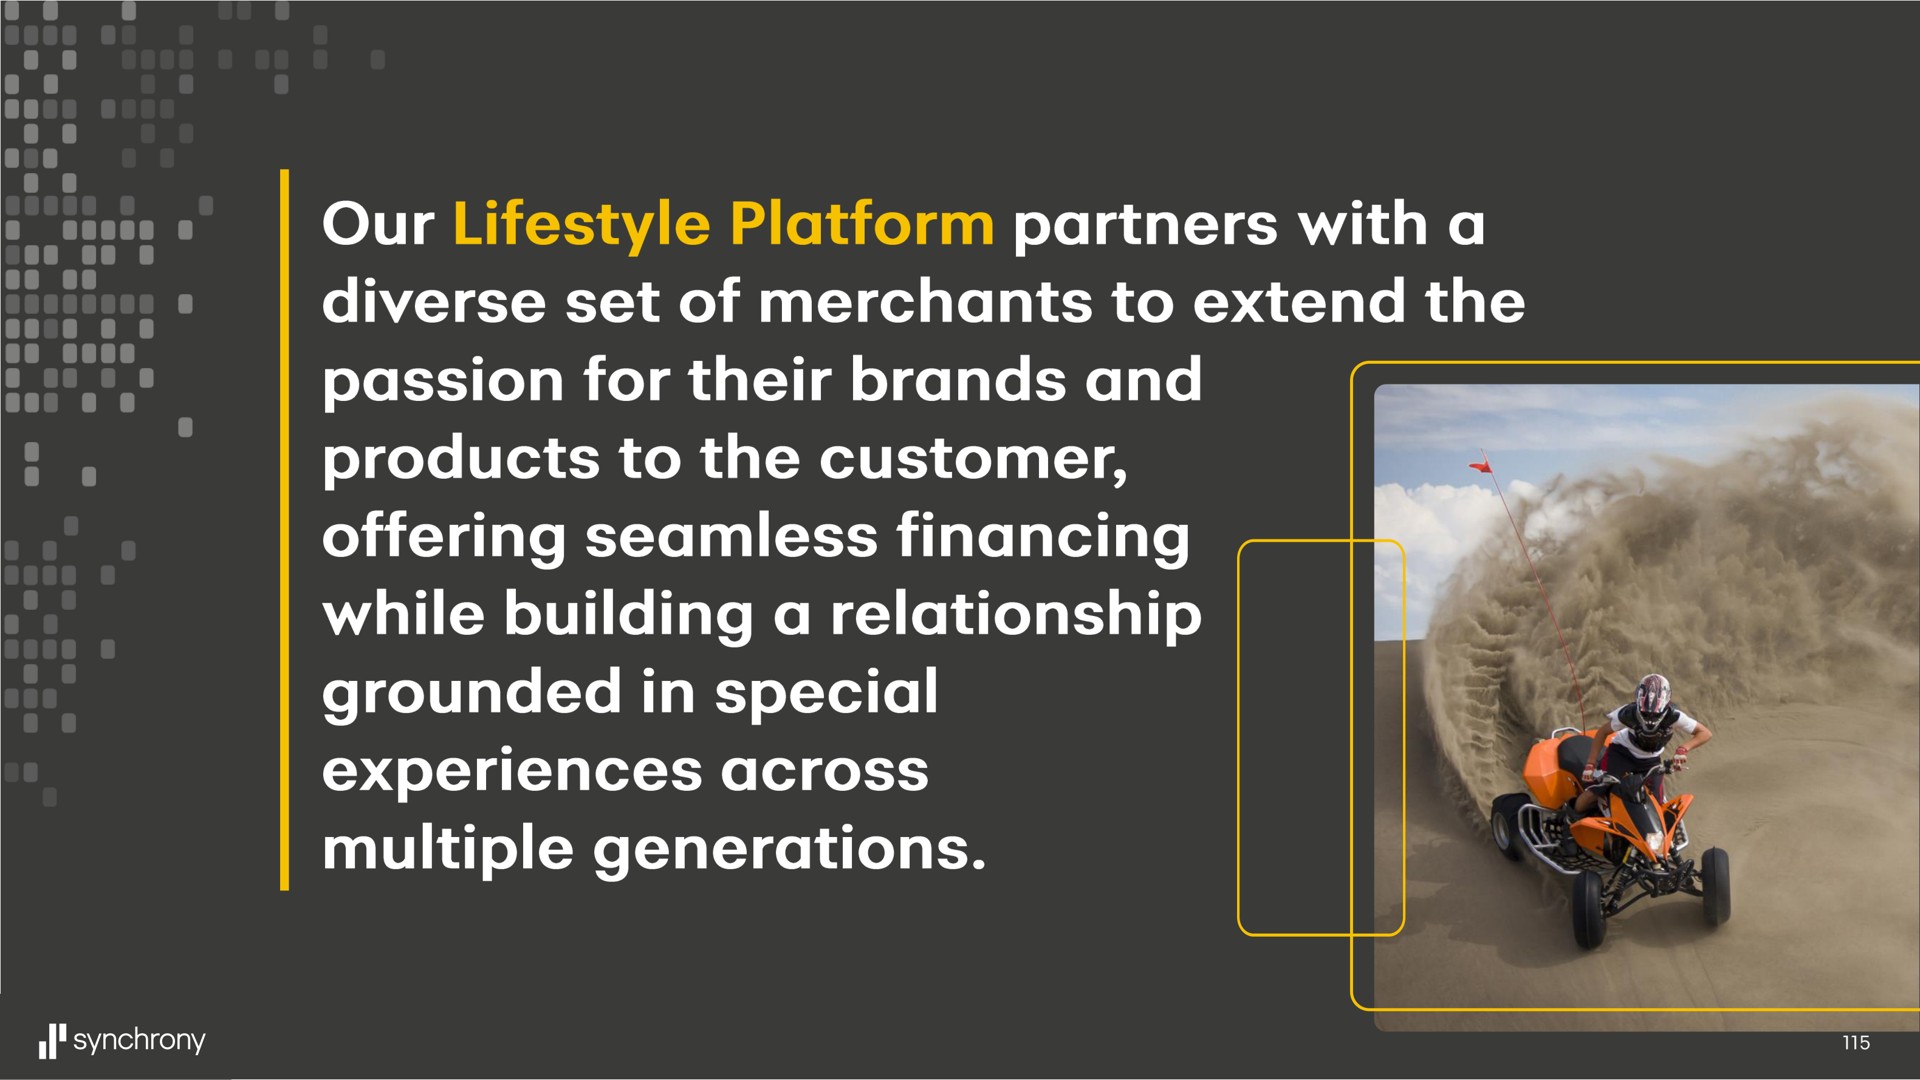 our platform partners with a diverse set of merchants to extend the passion for their brands and products to the customer offering seamless financing while building a relationship grounded in special experiences across multiple generations | Synchrony Financial